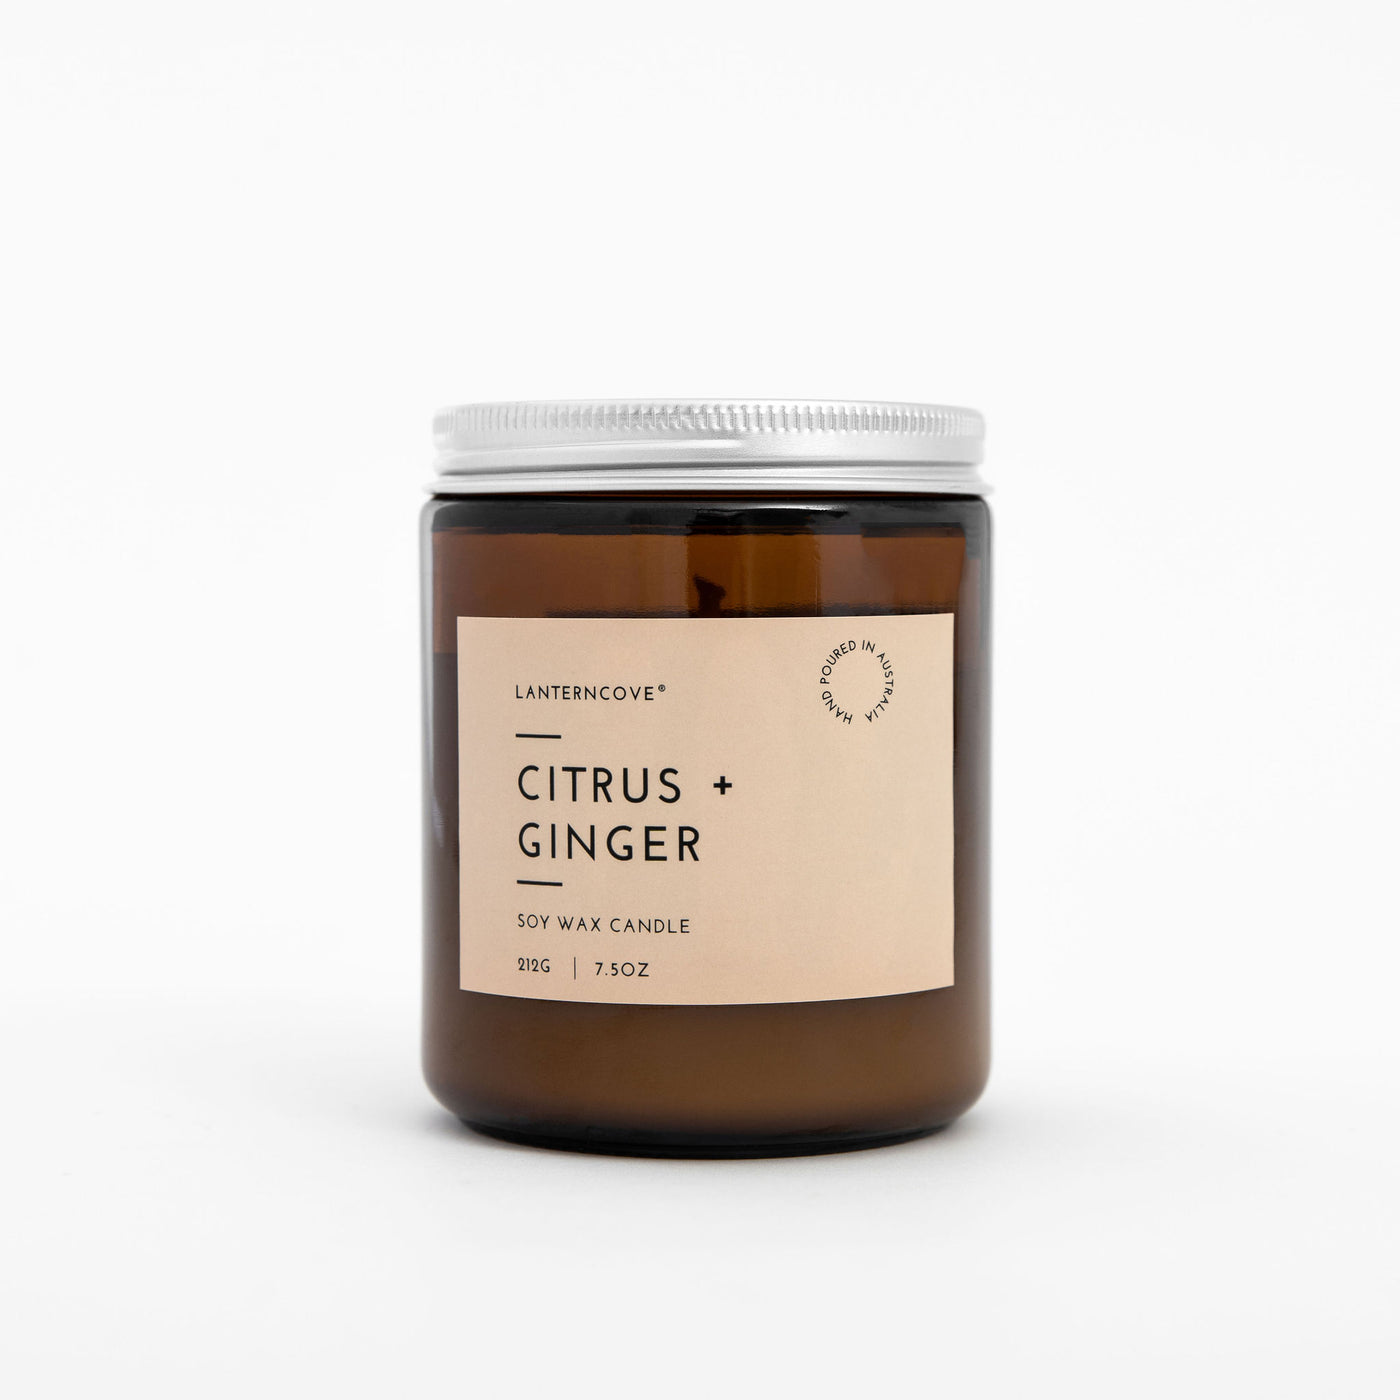 Lantern Cove Glo Citrus and Ginger 7.5oz Candle